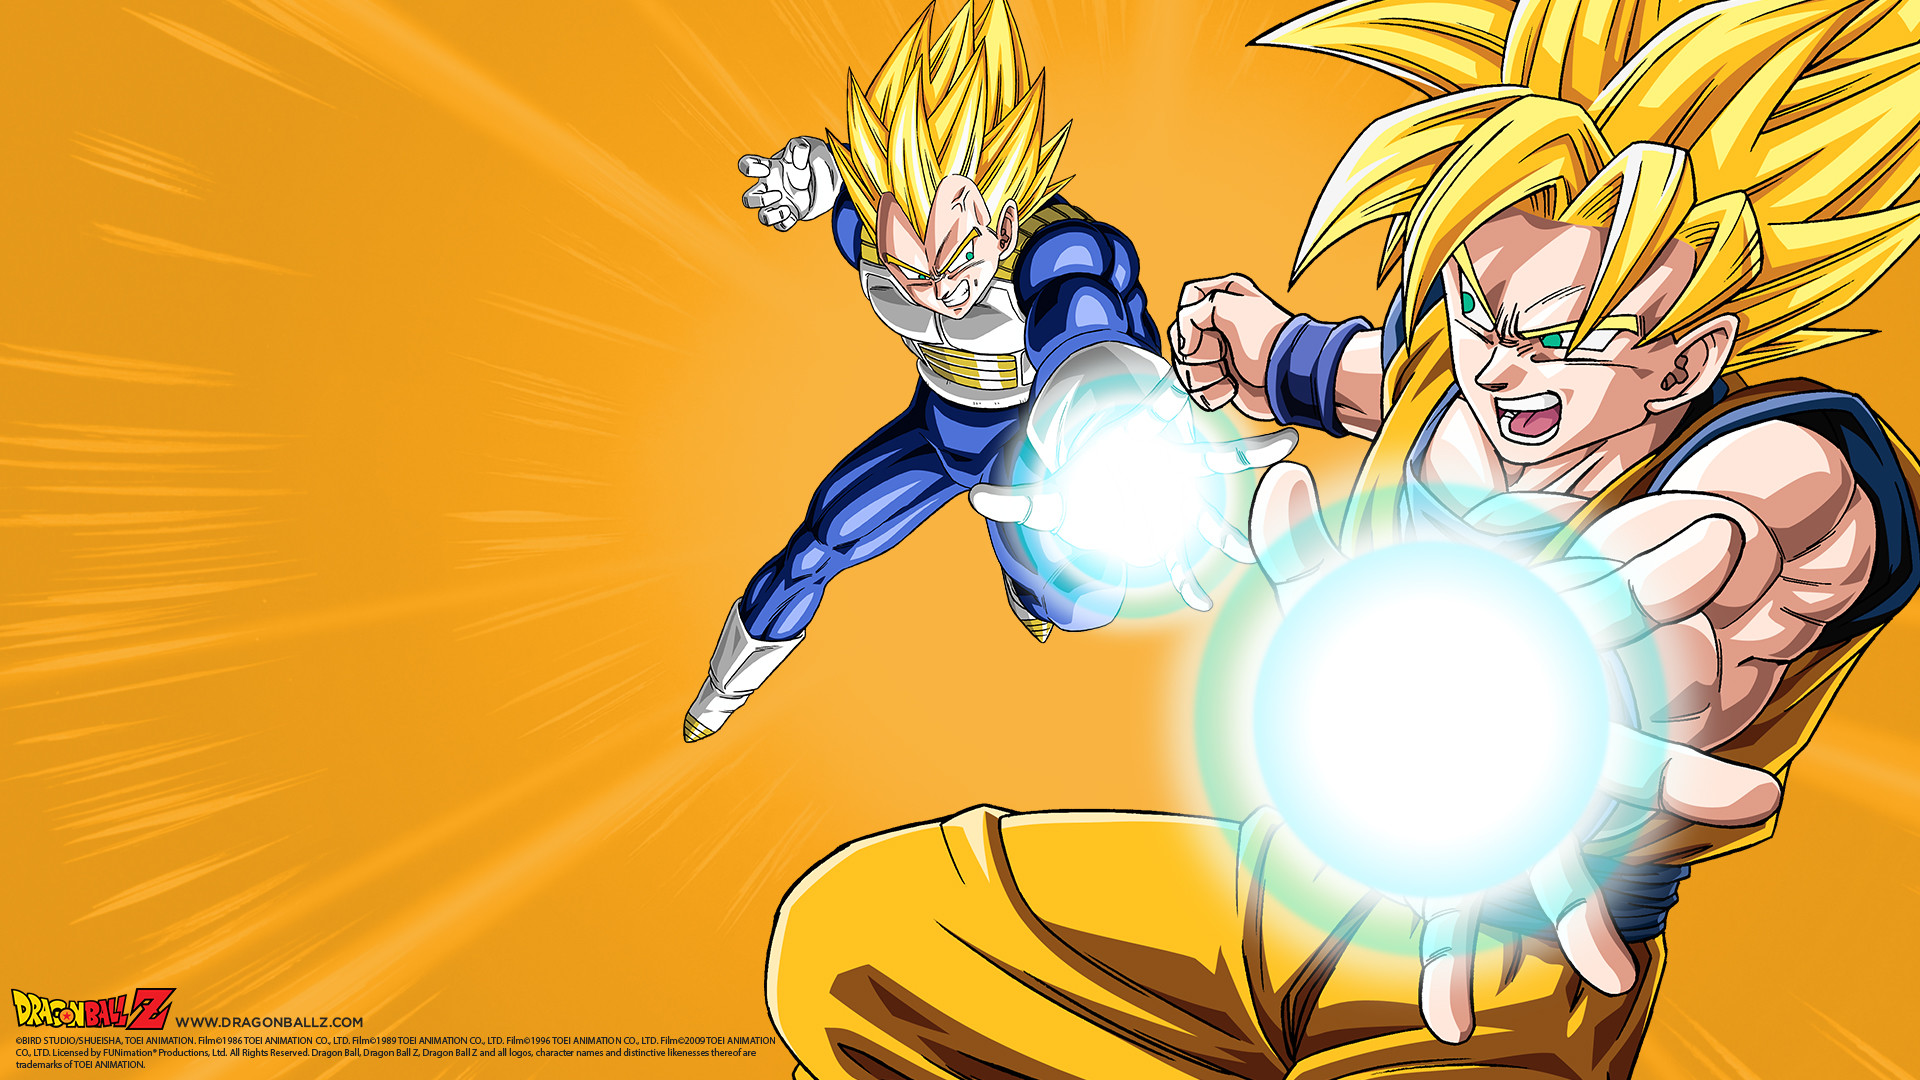 1920x1080 ... dragon ball z wallpapers best dragon ball z images fantastic ...